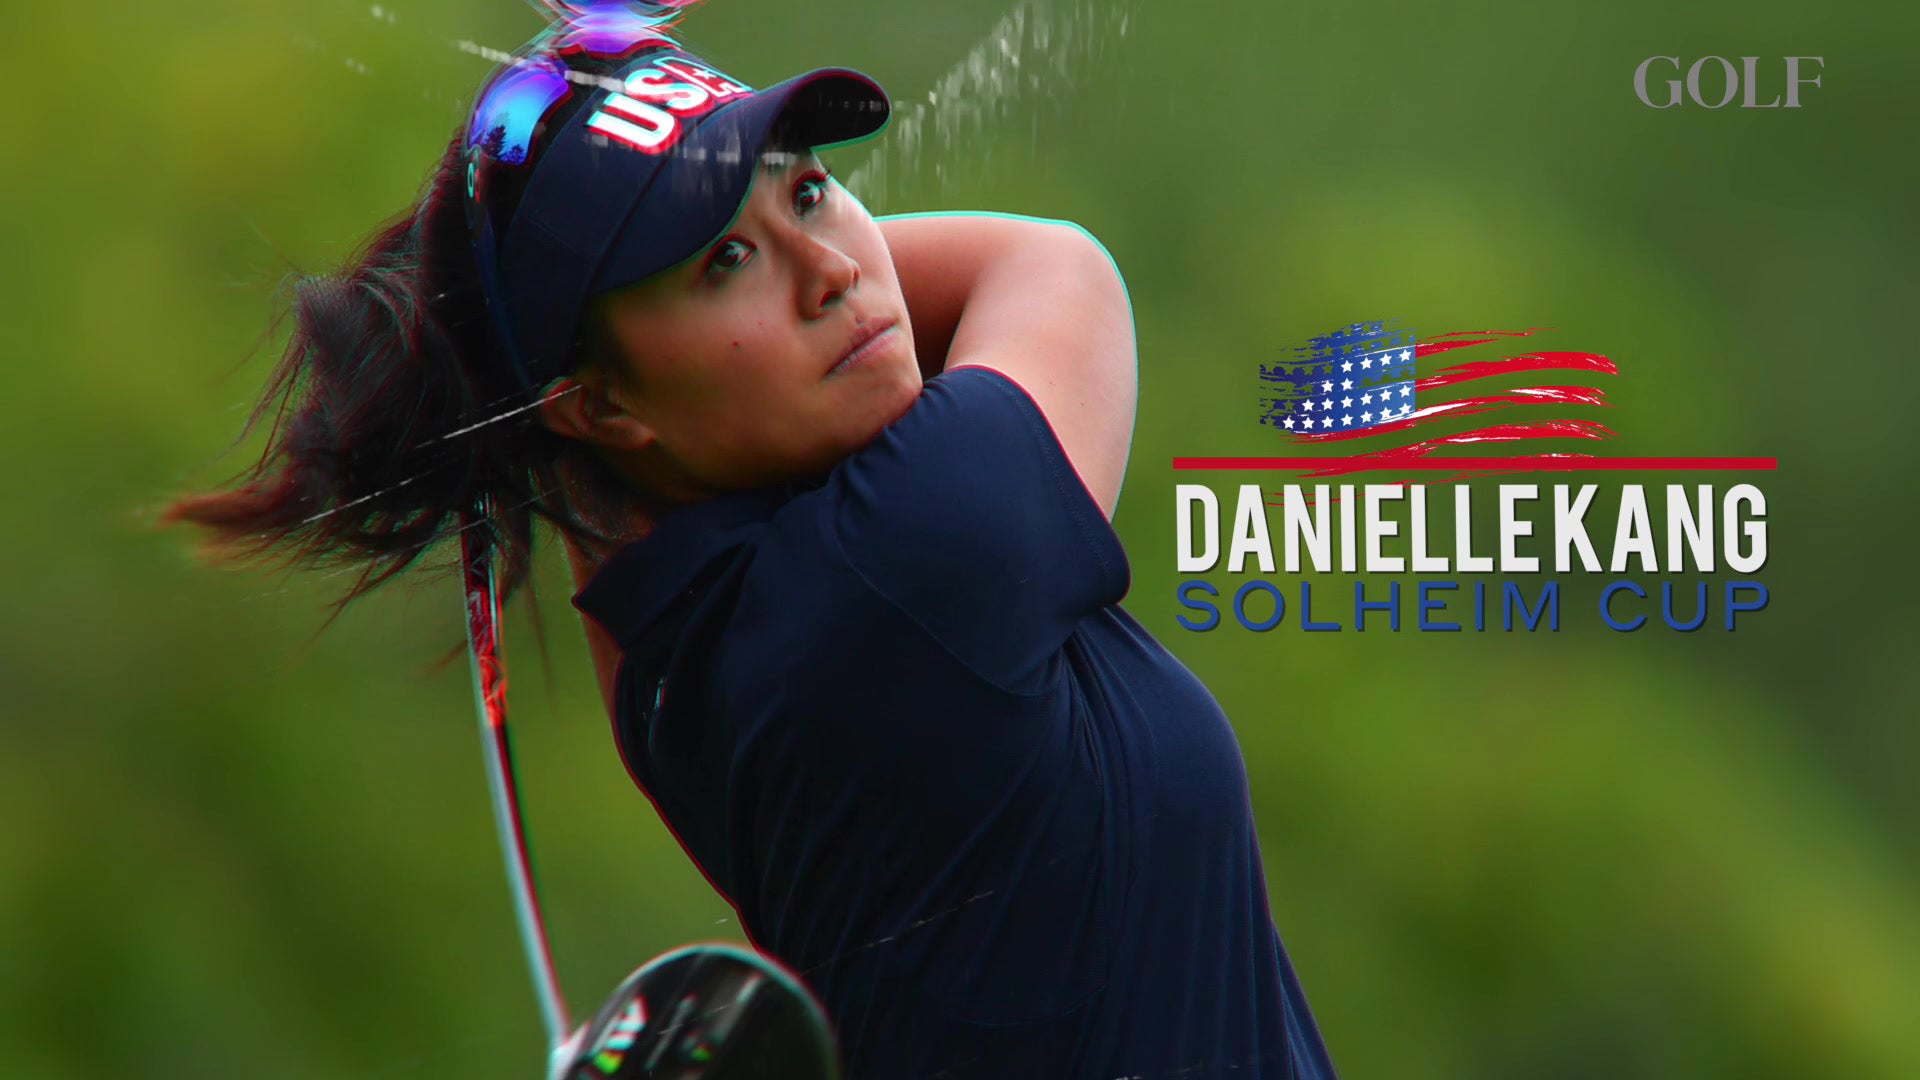 Danielle Kang Wants To Take Souls At The Solheim Cup Golf